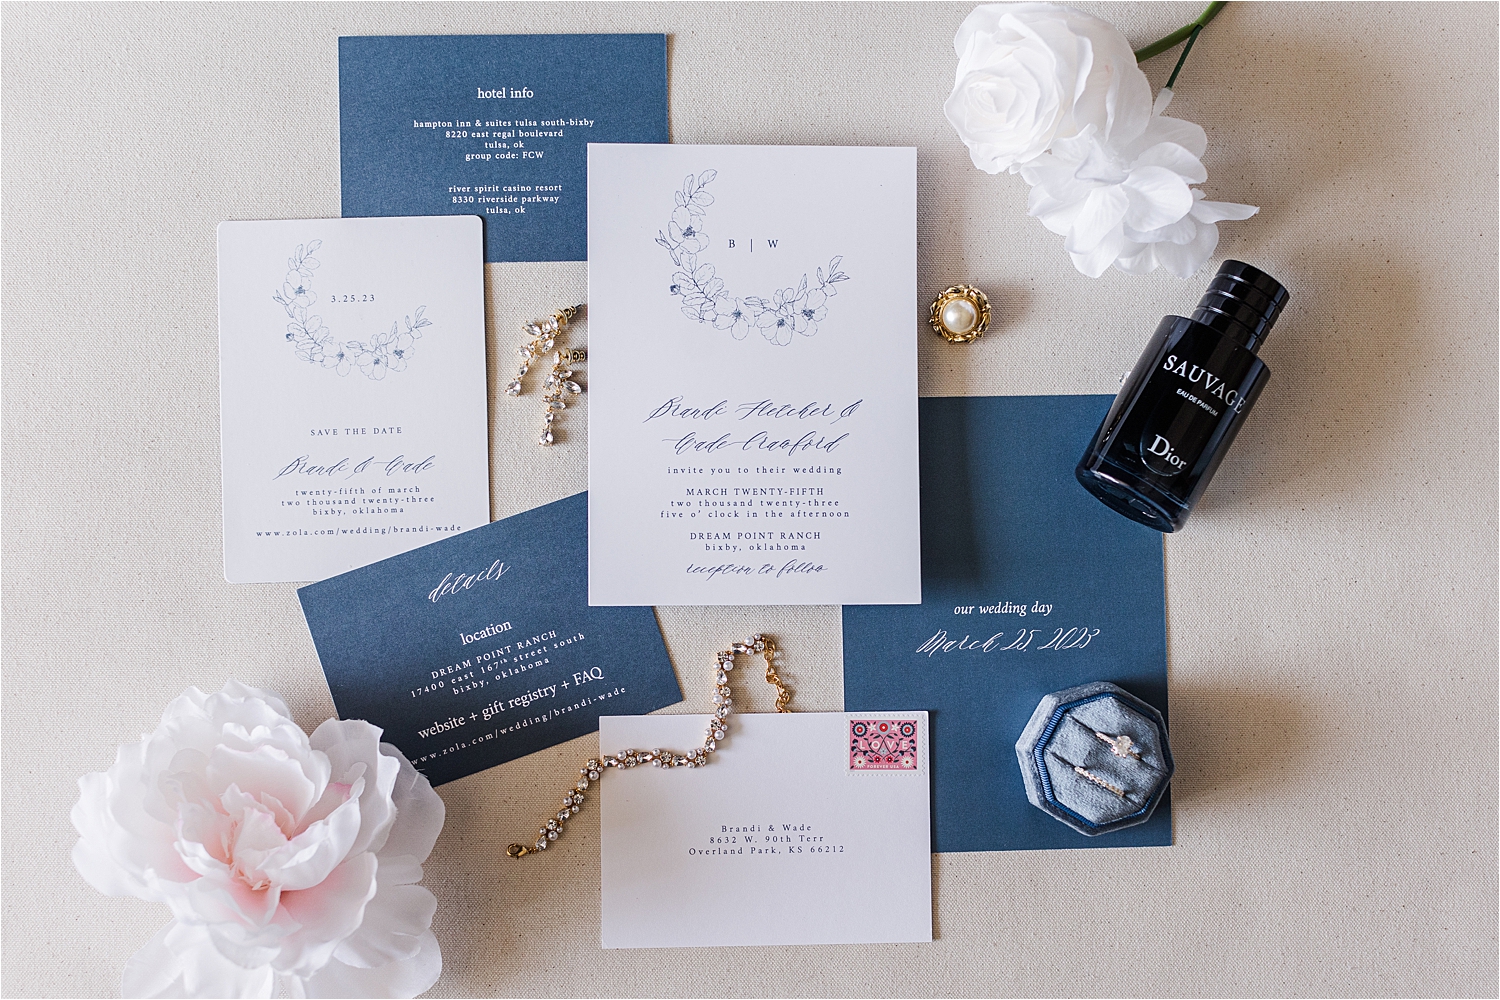 Dream Point Ranch Wedding invitation suite with jewelry details.